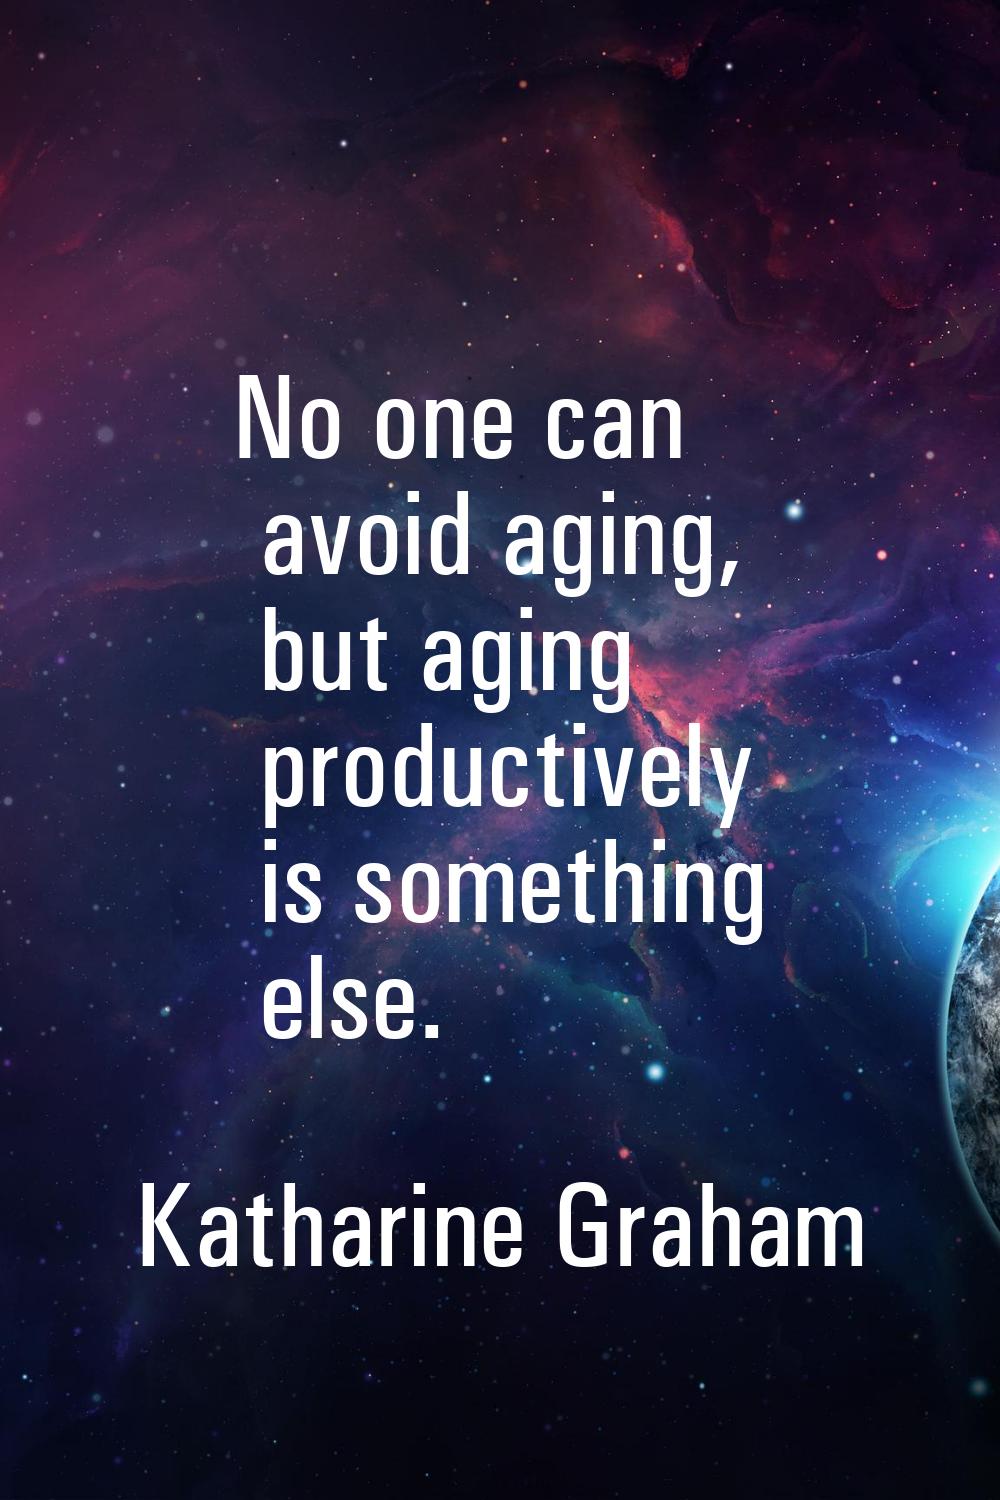 No one can avoid aging, but aging productively is something else.